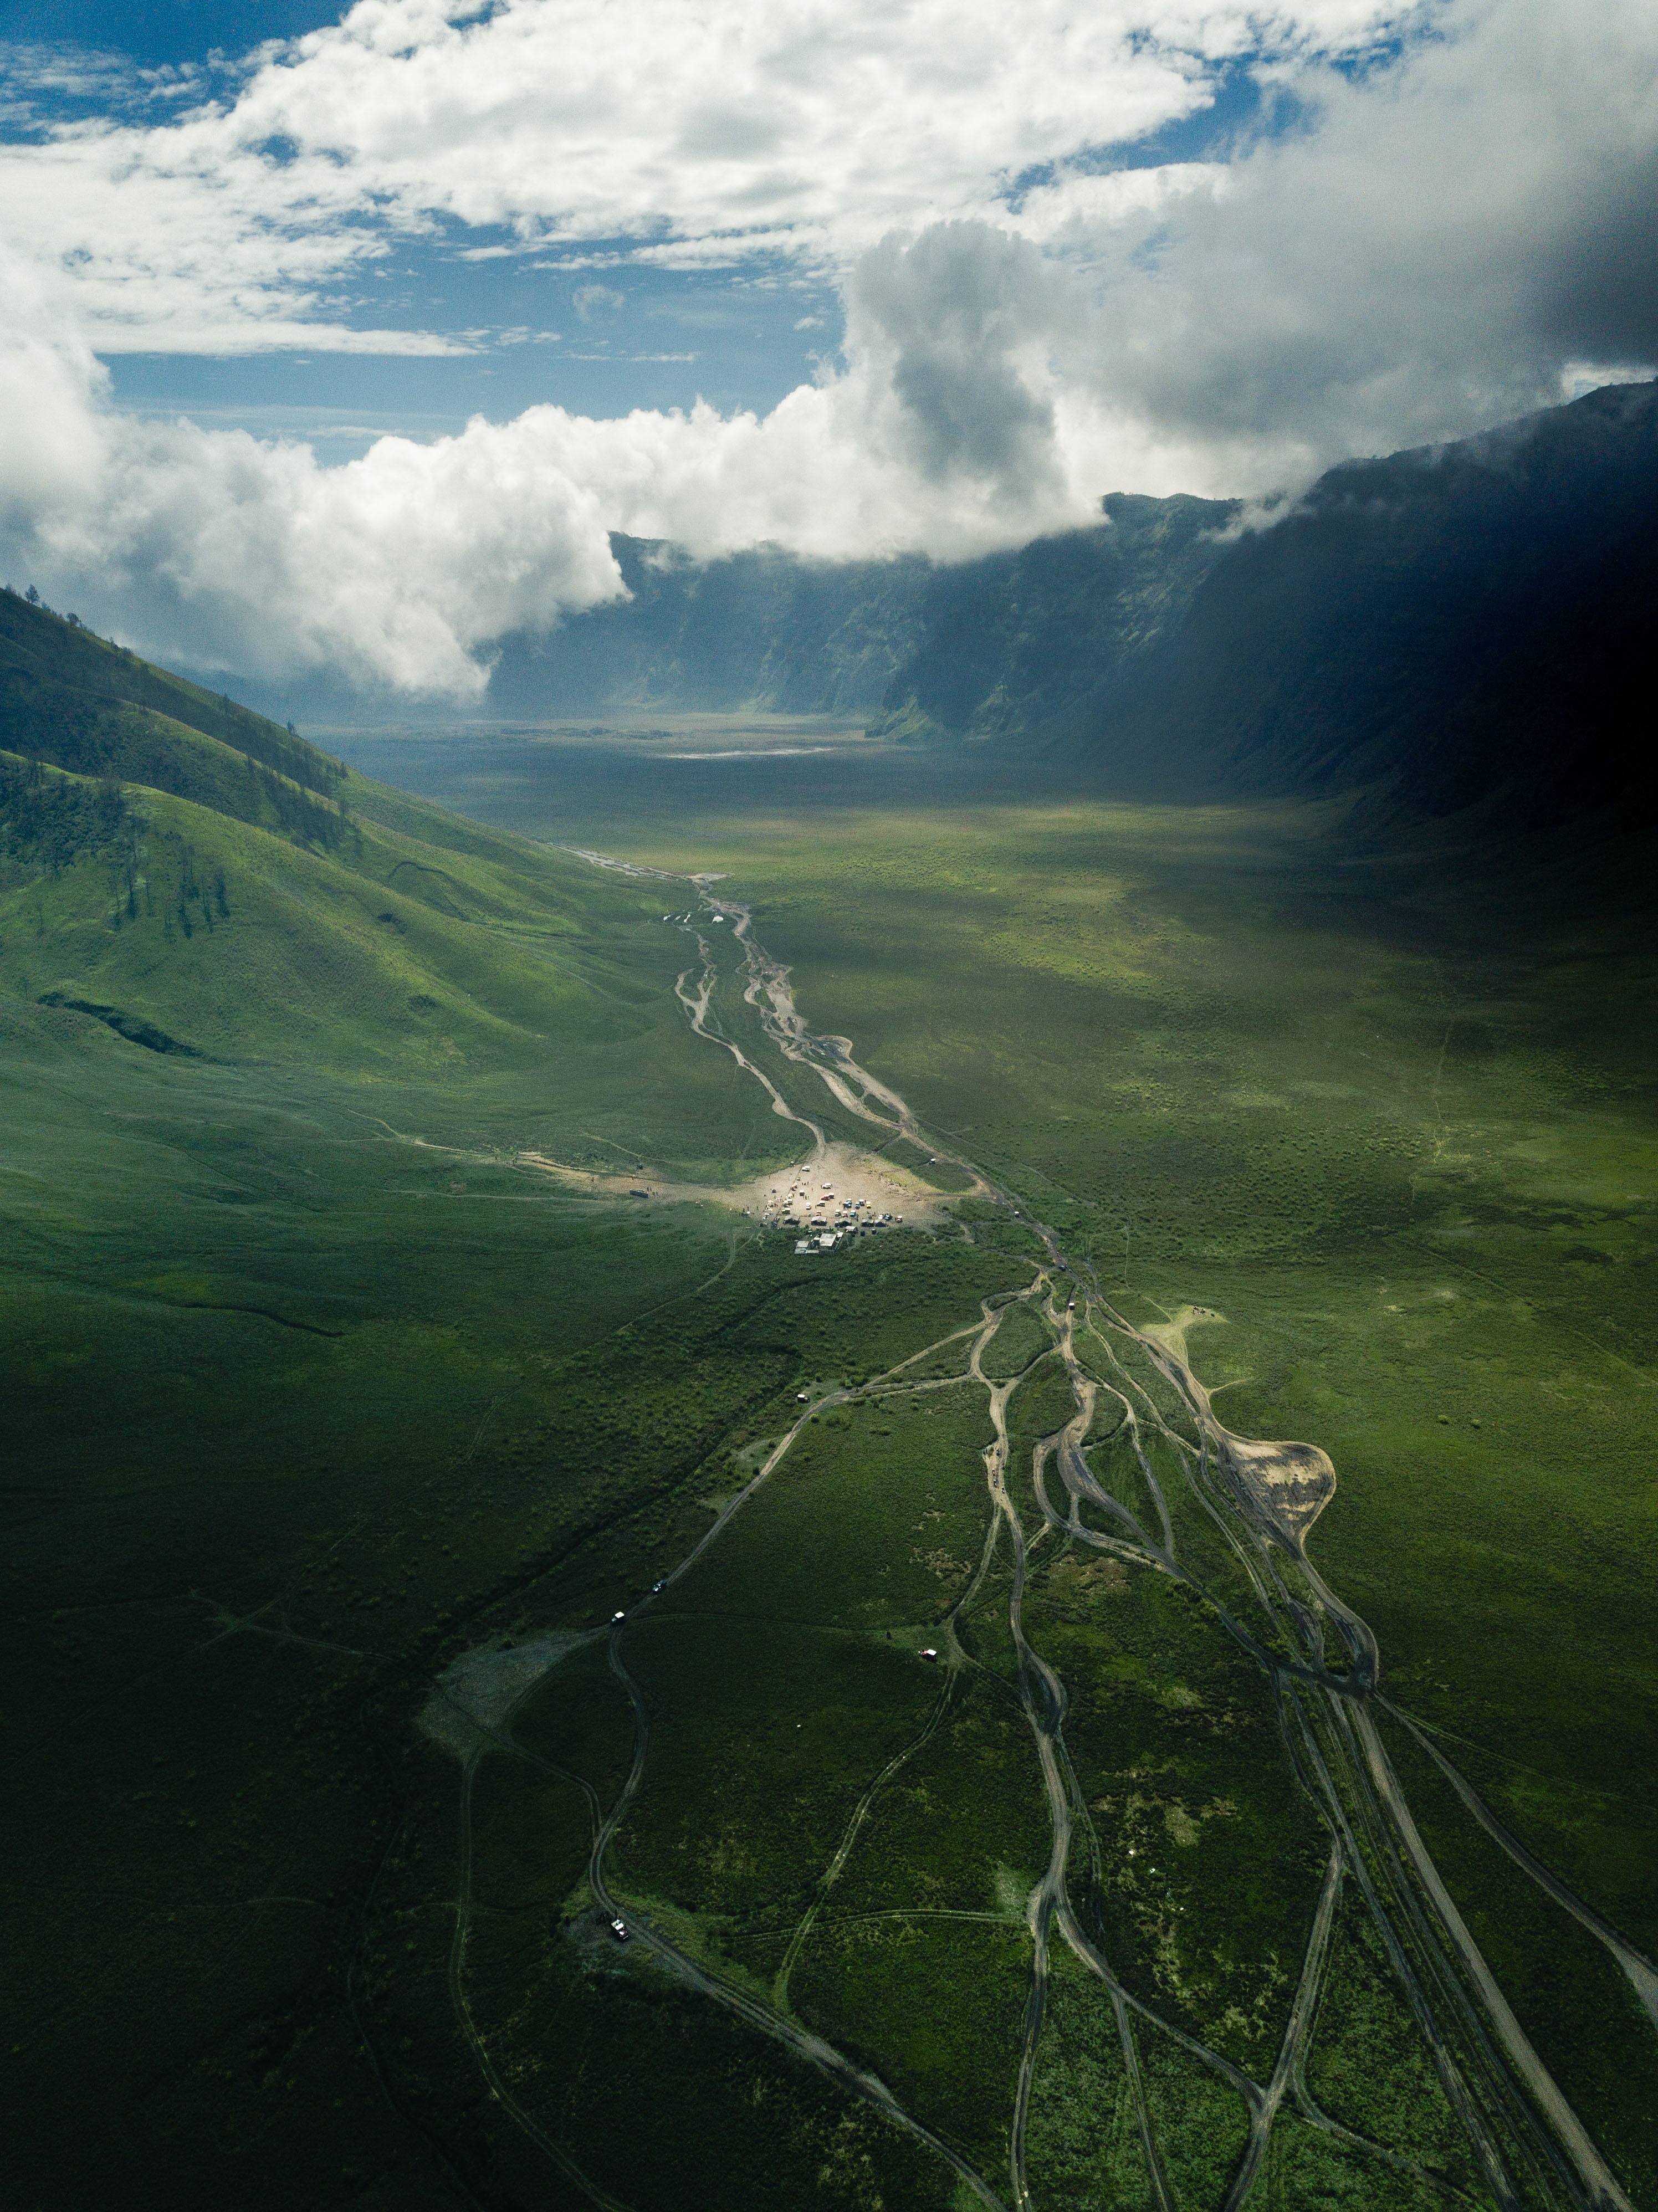 view from above, roads, landscape, nature, clouds, hills, valley 32K